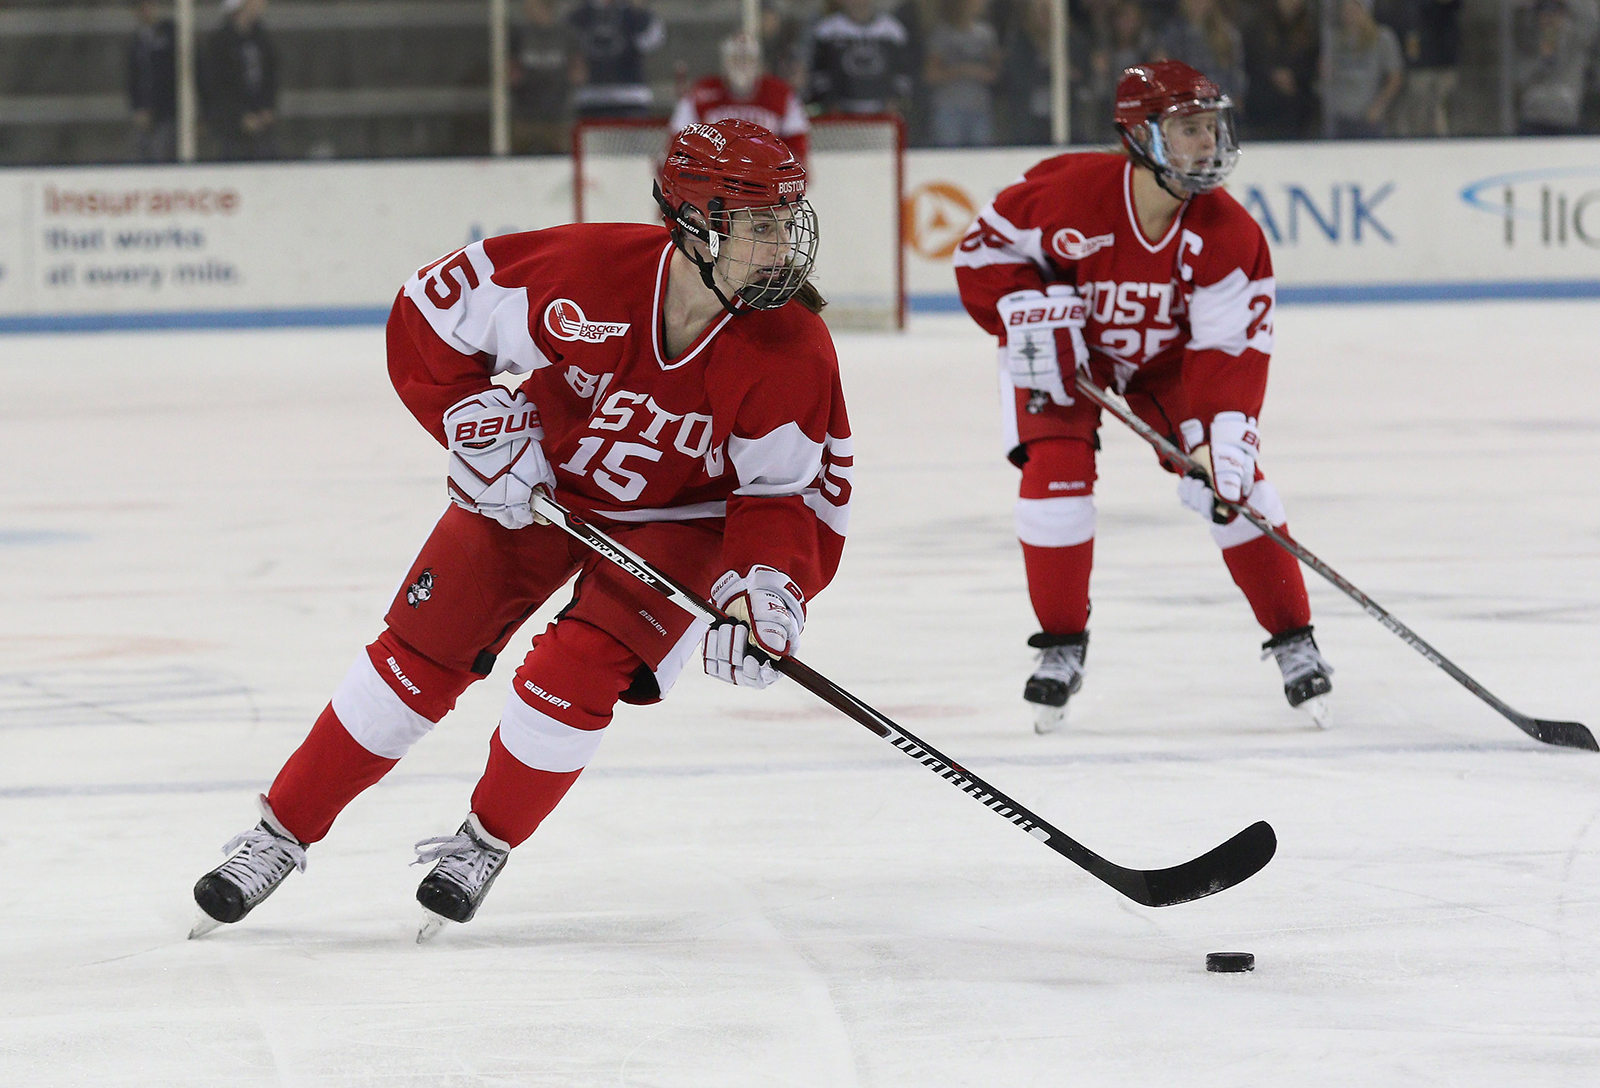 Mary Parker is currently third in the nation in points during her first year at BU. PHOTO COURTESY CRAIG HOUTZ 